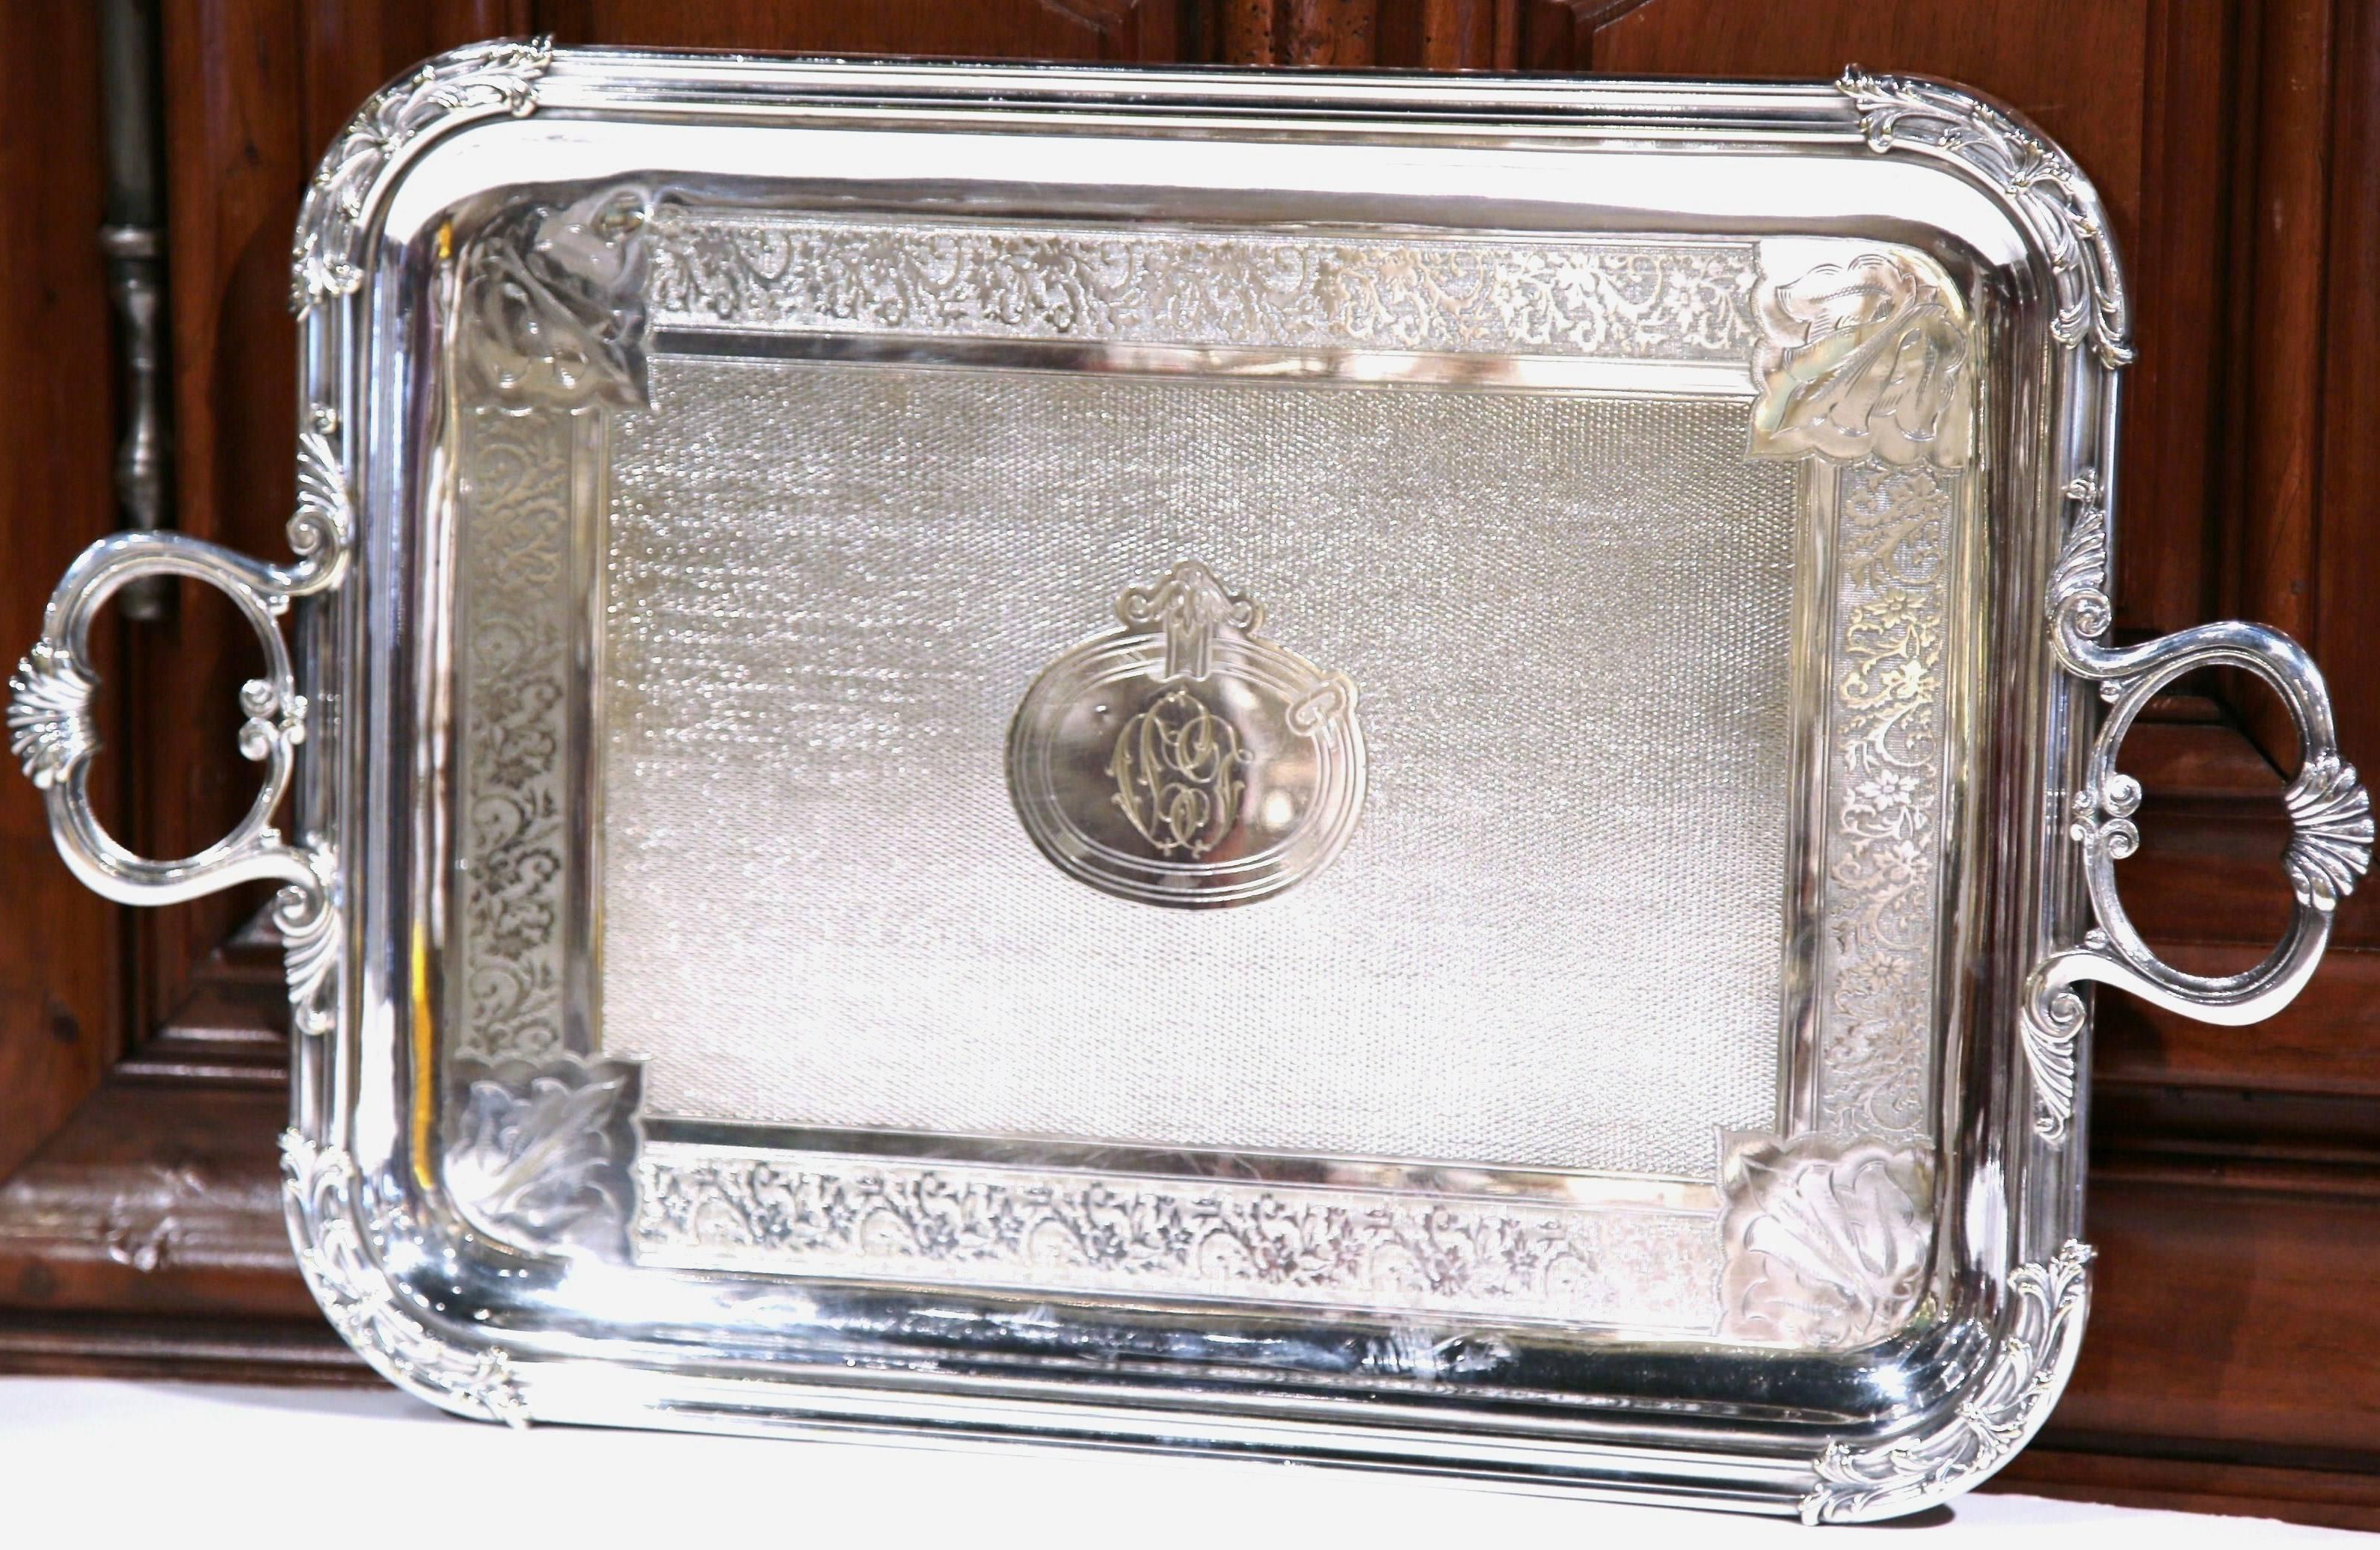 This elegant antique silver plated tray was created in Paris, France, circa 1894. The rectangular serving piece has two side handles, repousse motifs of leaf motif in each corner, a center monogram, and intricate engraved designs on the surface. The